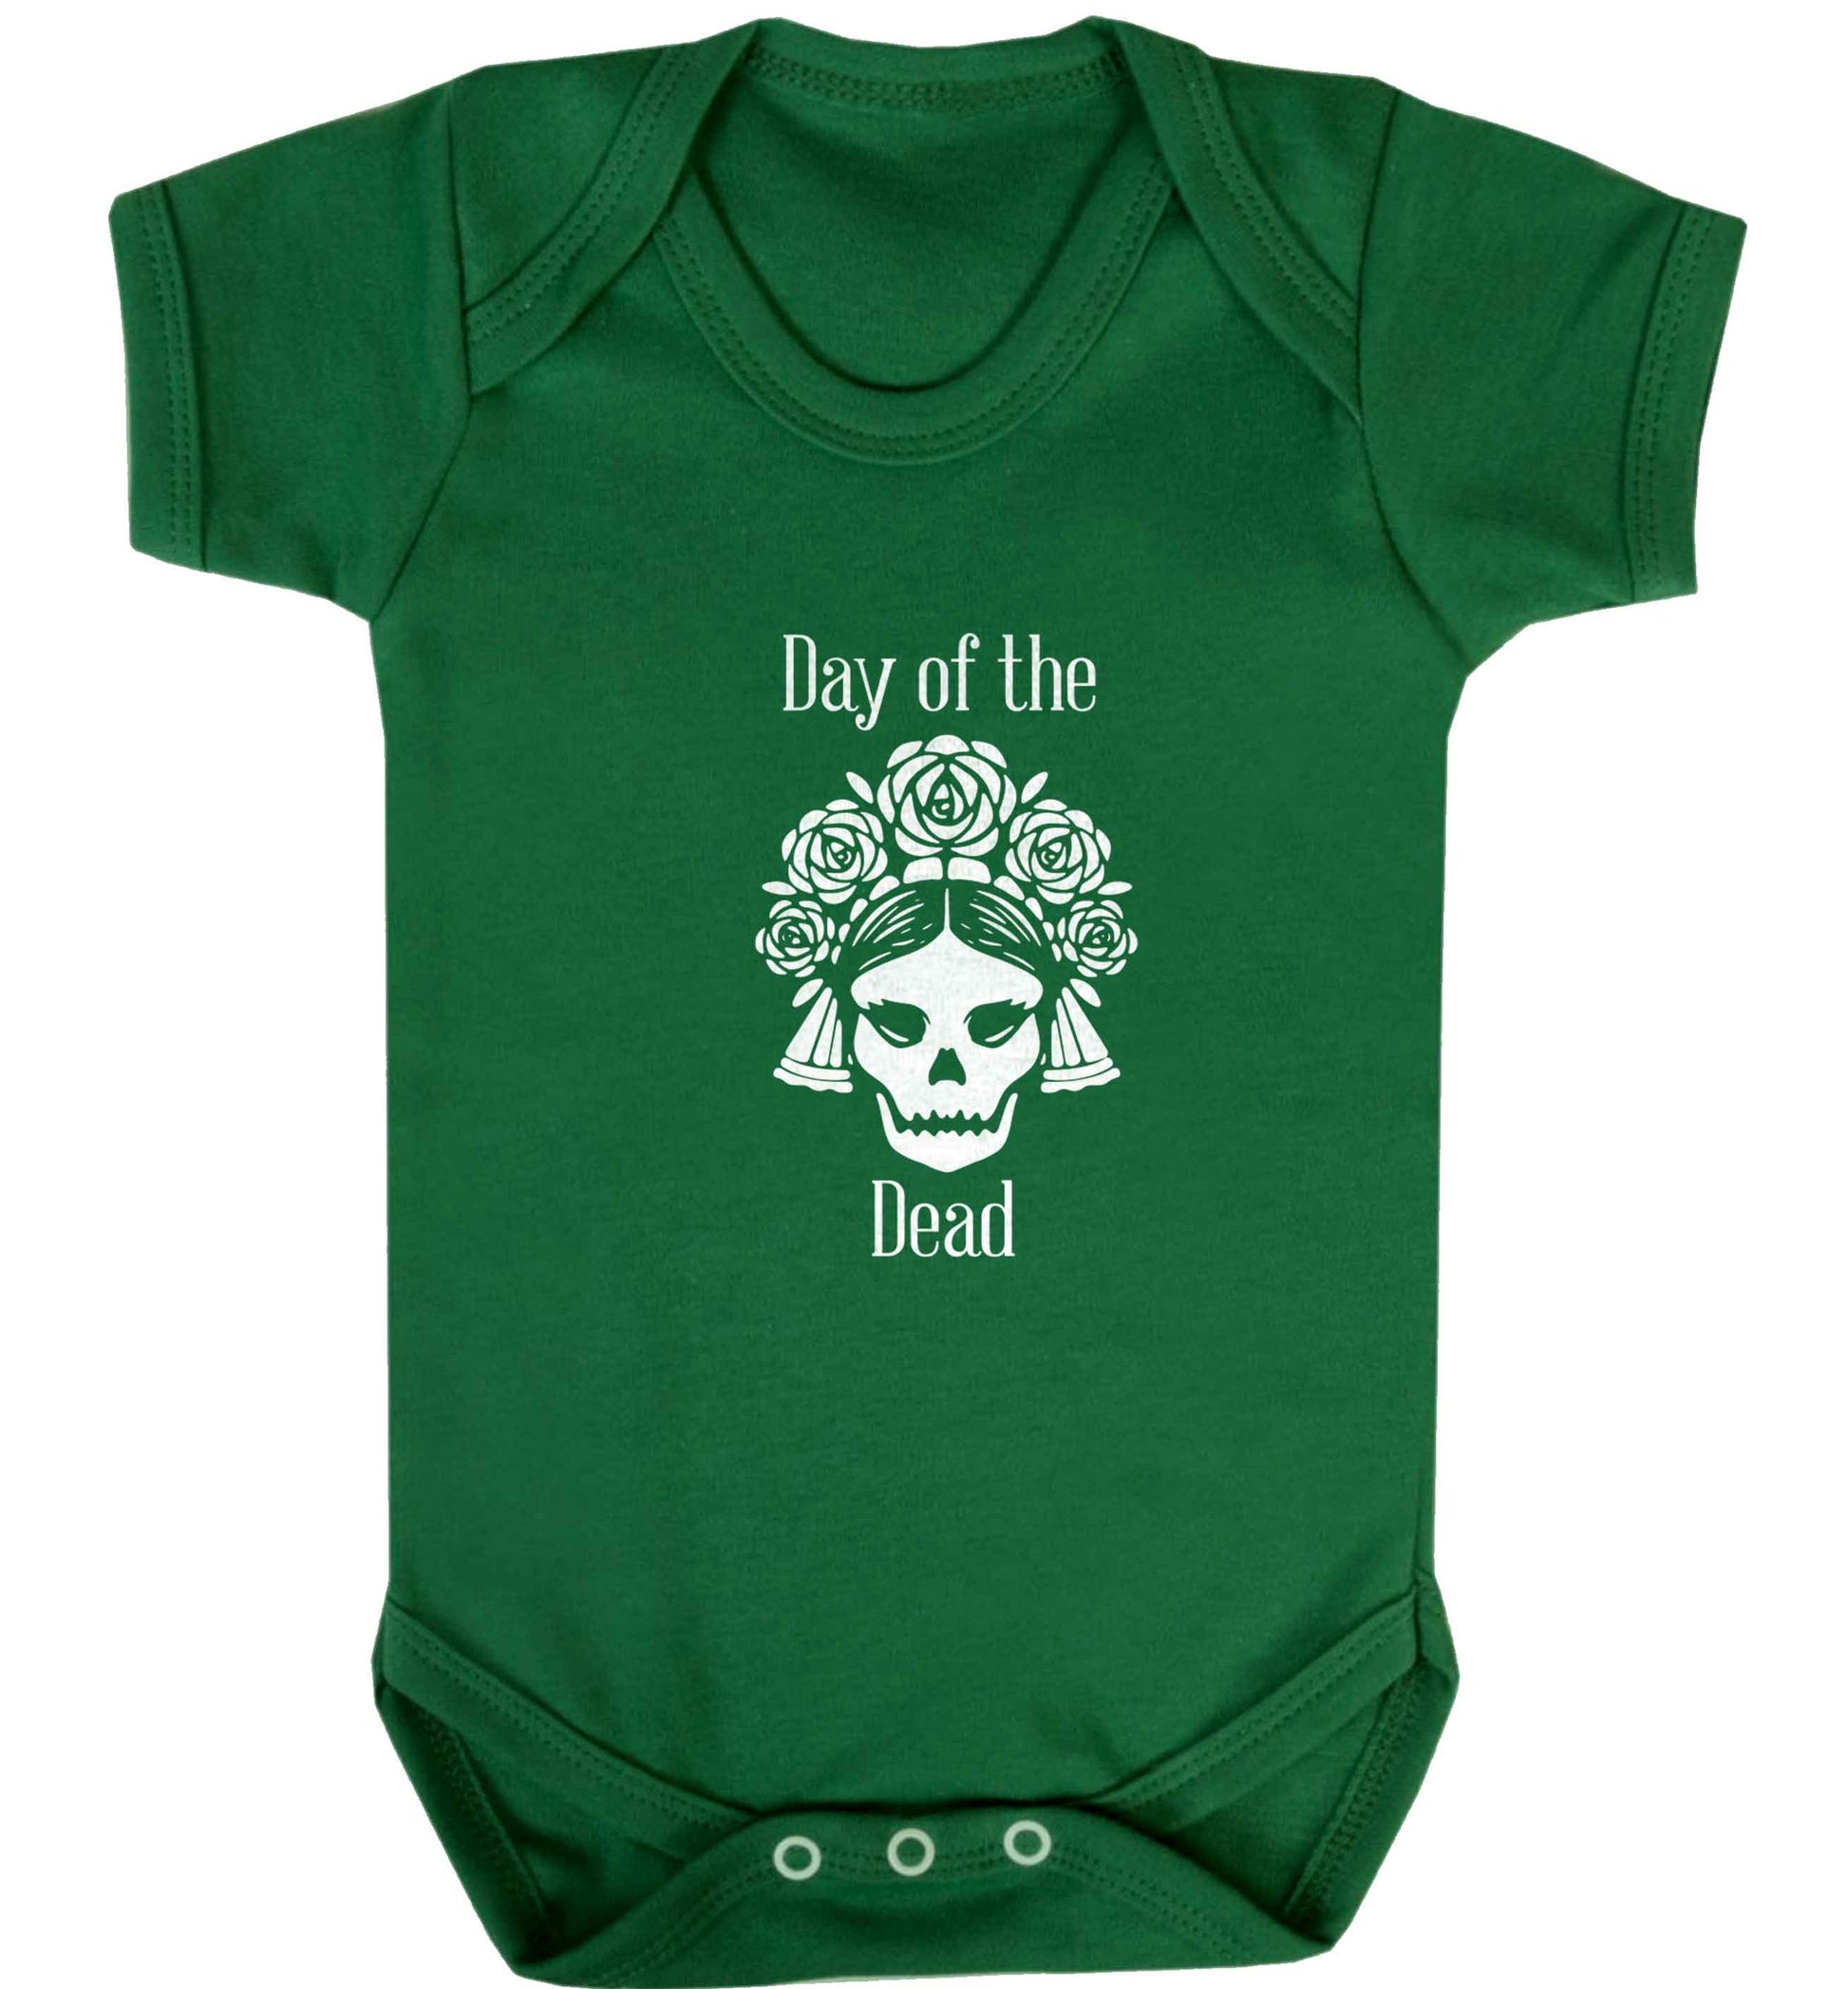 Day of the dead baby vest green 18-24 months